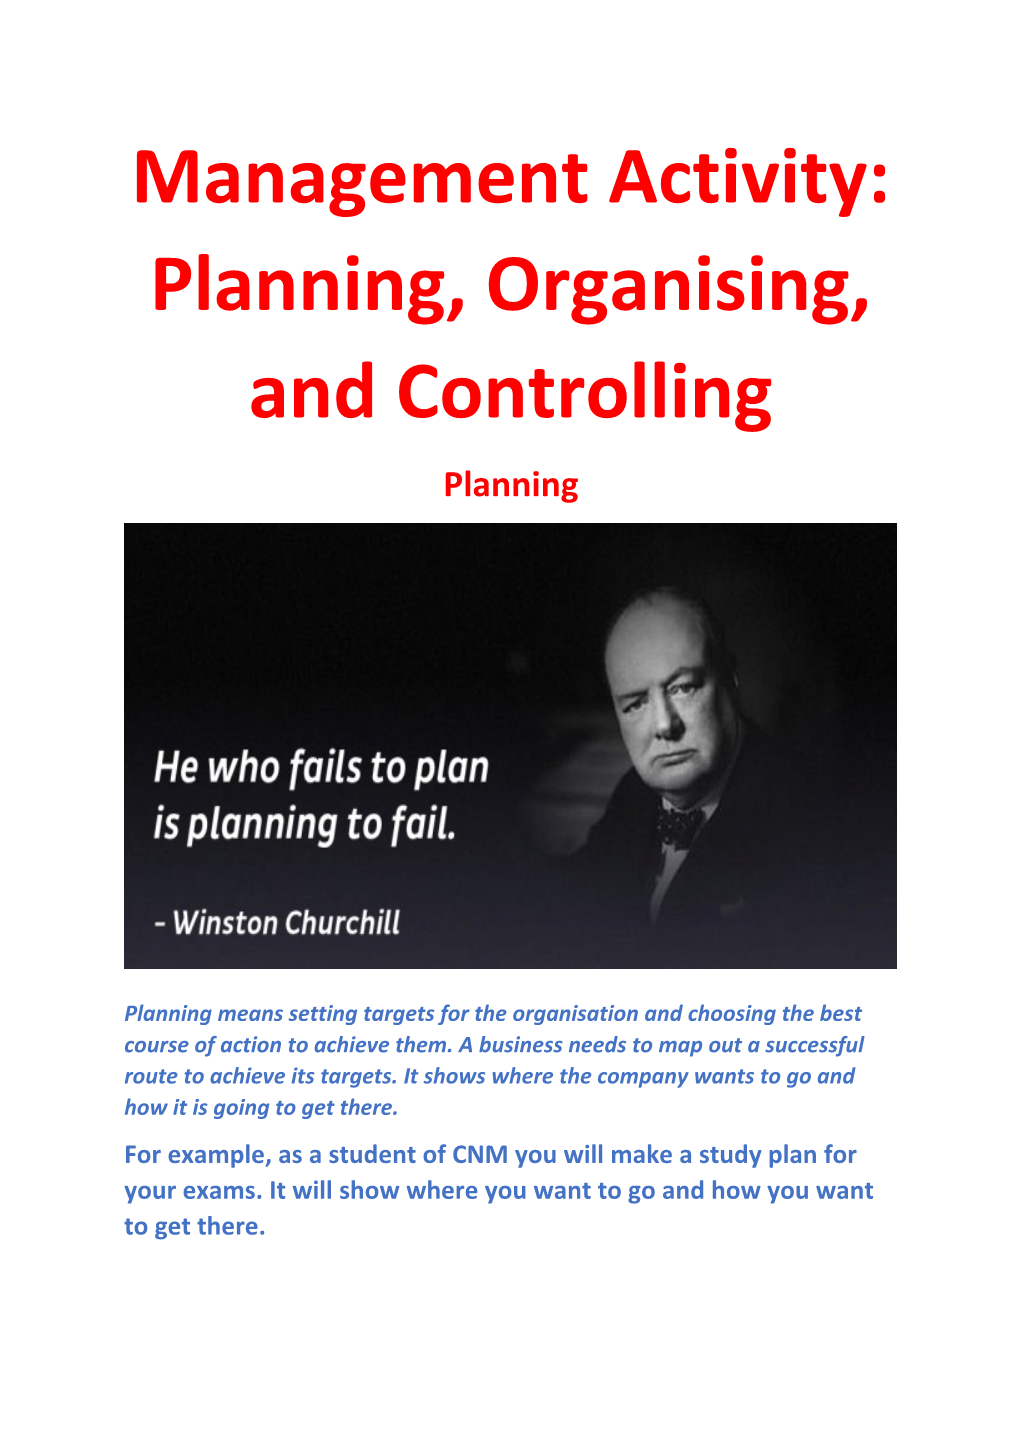 Management Activity: Planning, Organising, and Controlling